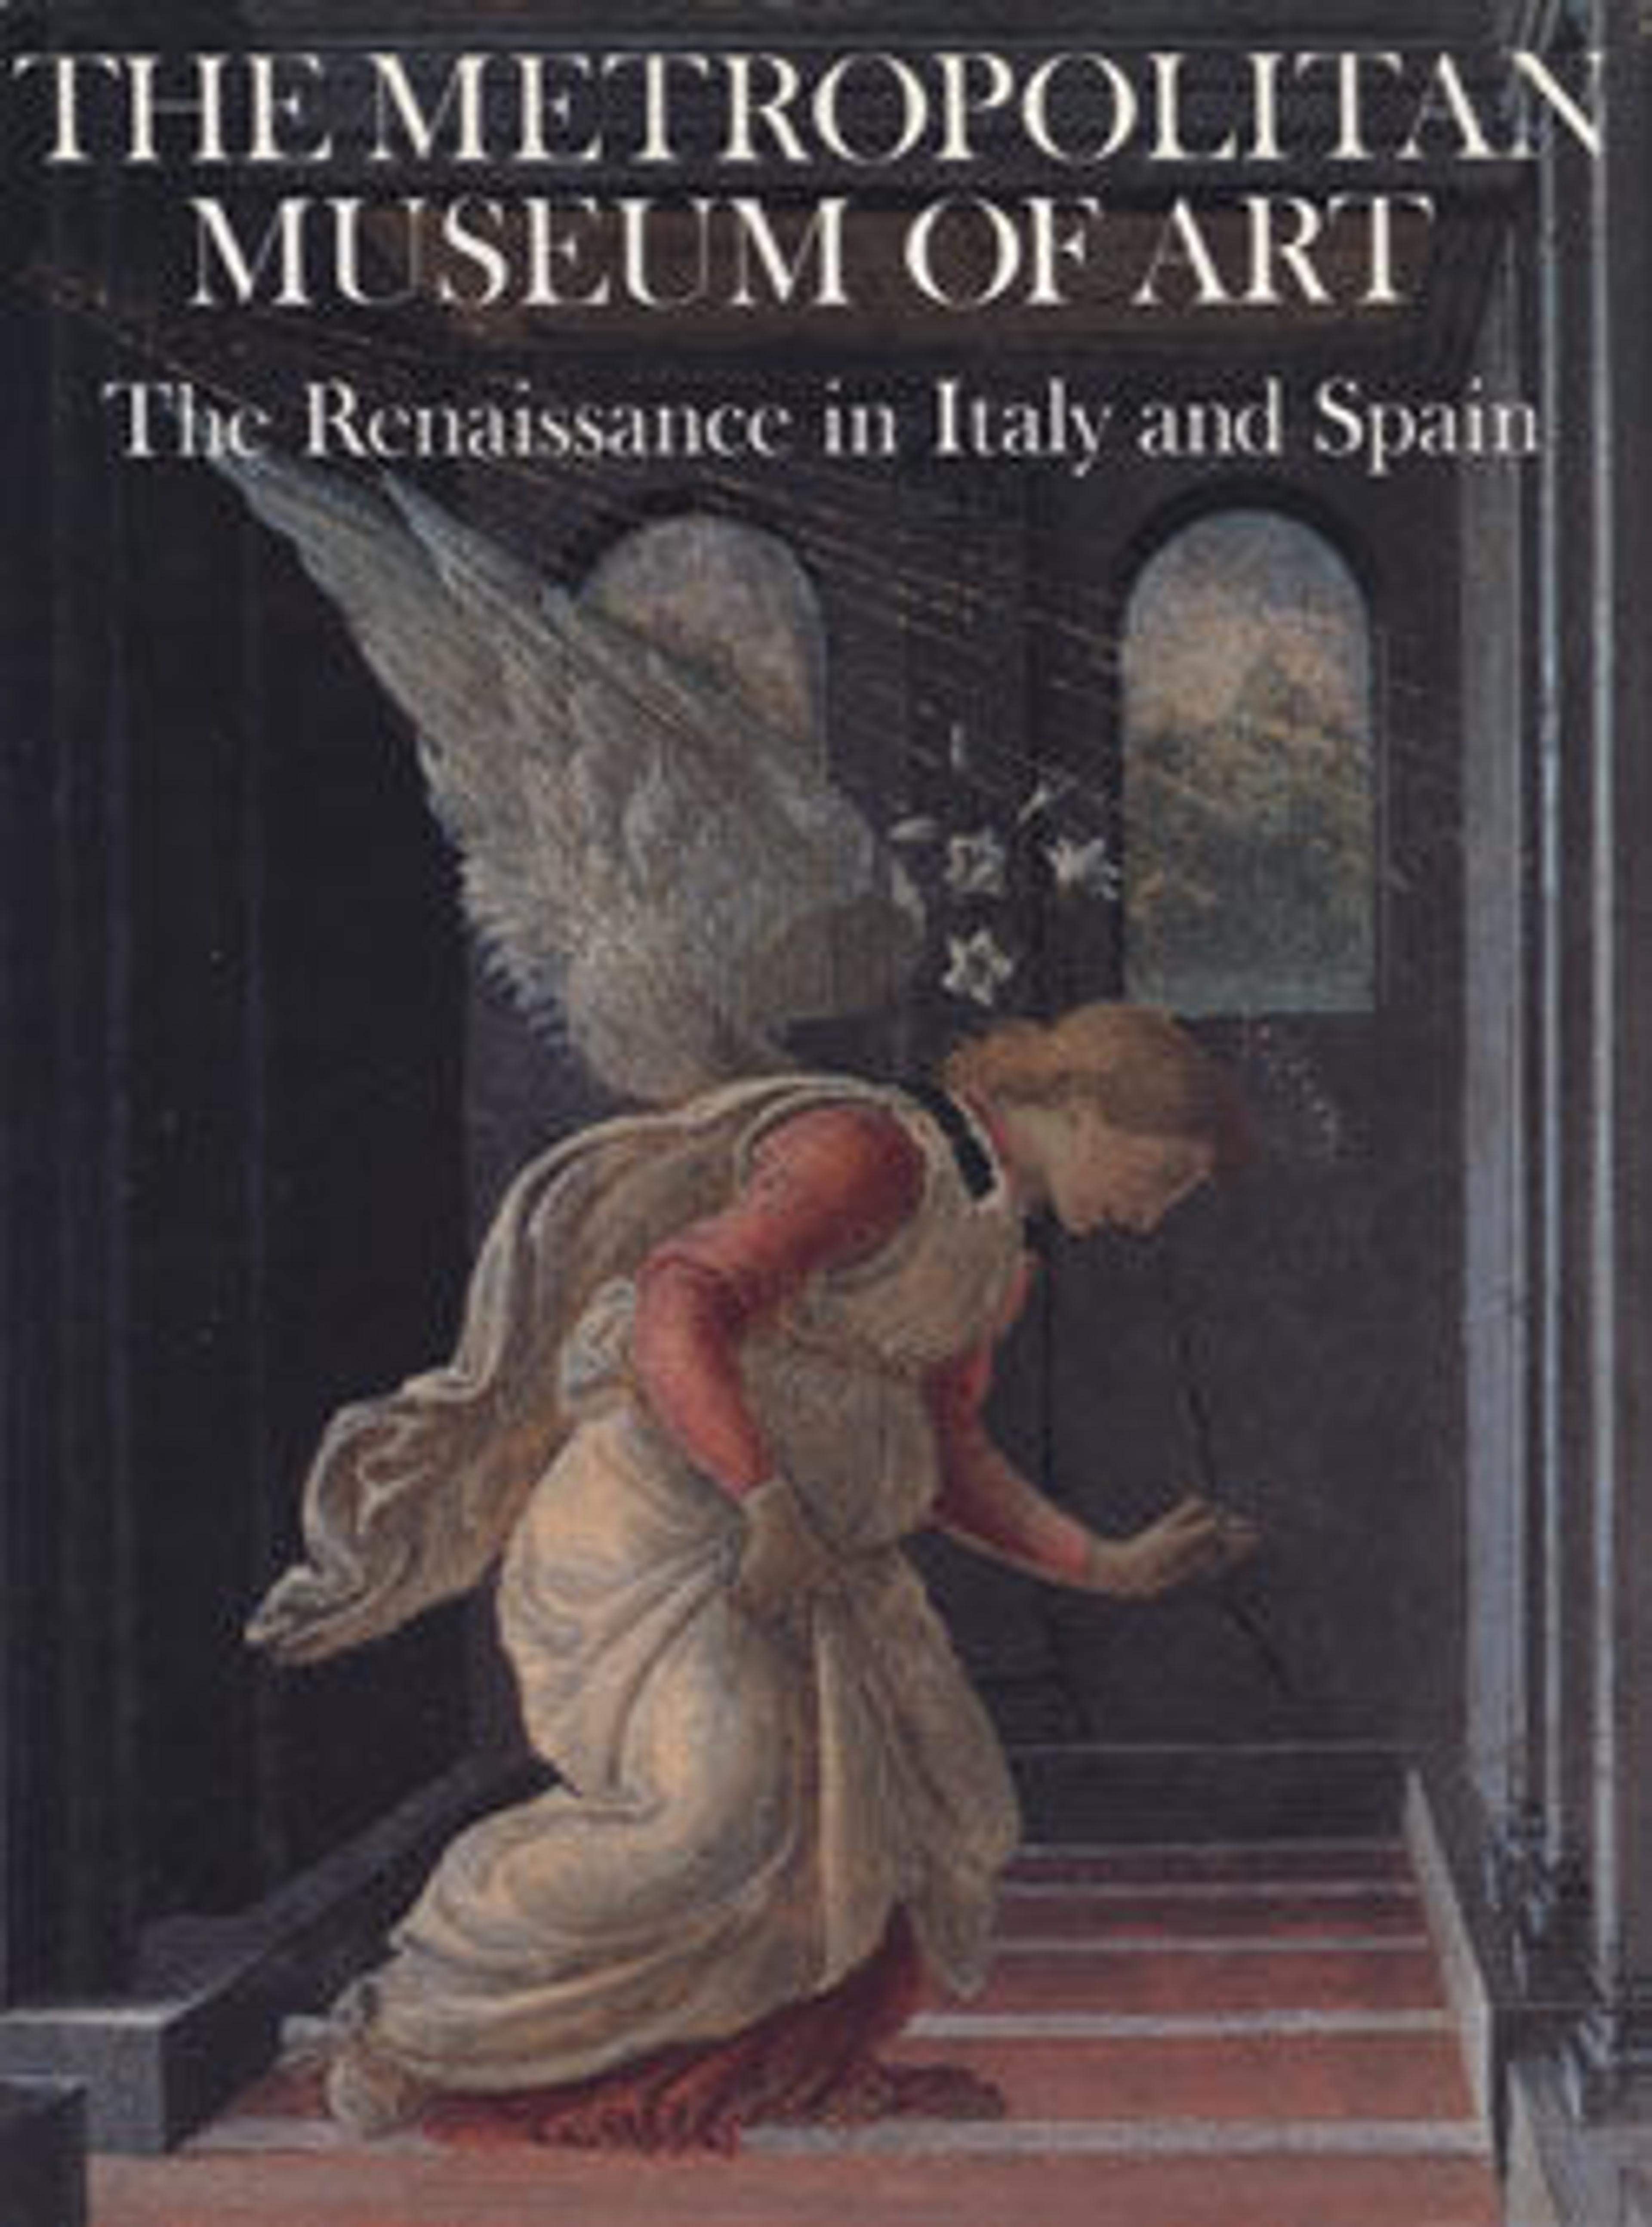 The Metropolitan Museum of Art. Vol. 4, The Renaissance in Italy and Spain